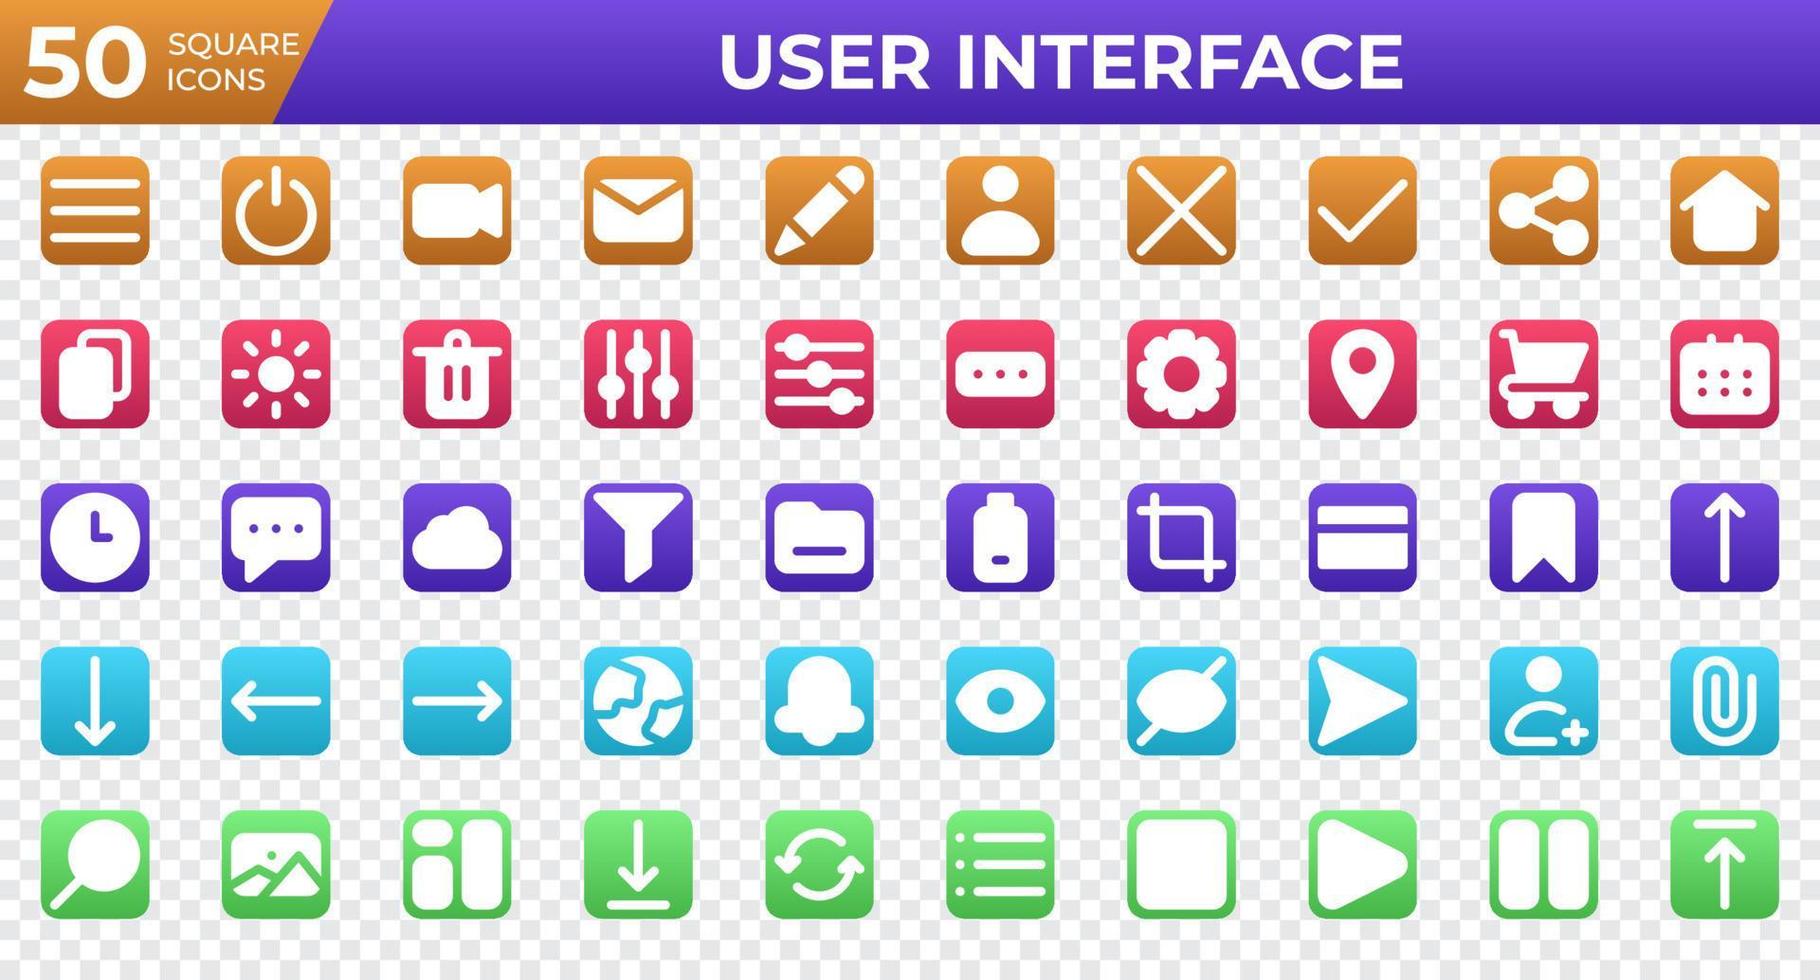 Set of 50 User Interface icons in square style. Menu, calendar, clock. Square icons collection. Vector illustration